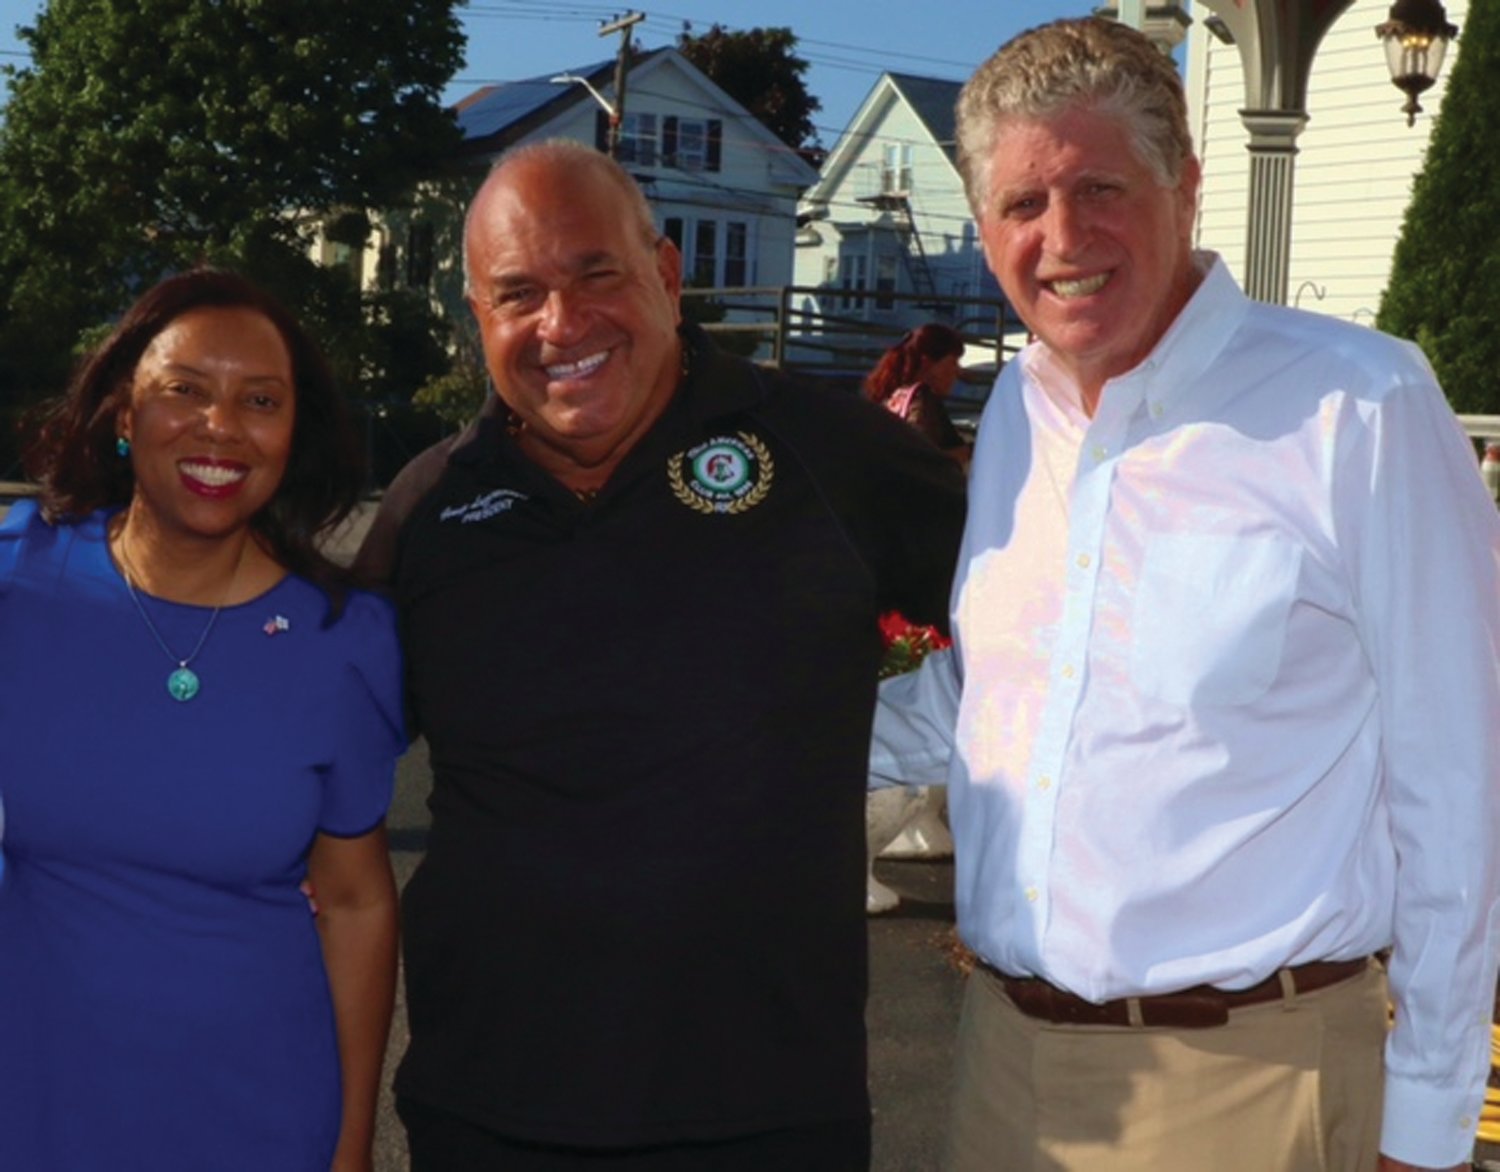 WARM WELCOME: Italo-American Club President and Johnston resident George Lazzareschi Jr. welcomes Gov. Dan McKee and Lt. Gov. Sabina Matos to last Friday night’s cookout and clambake in Providence.